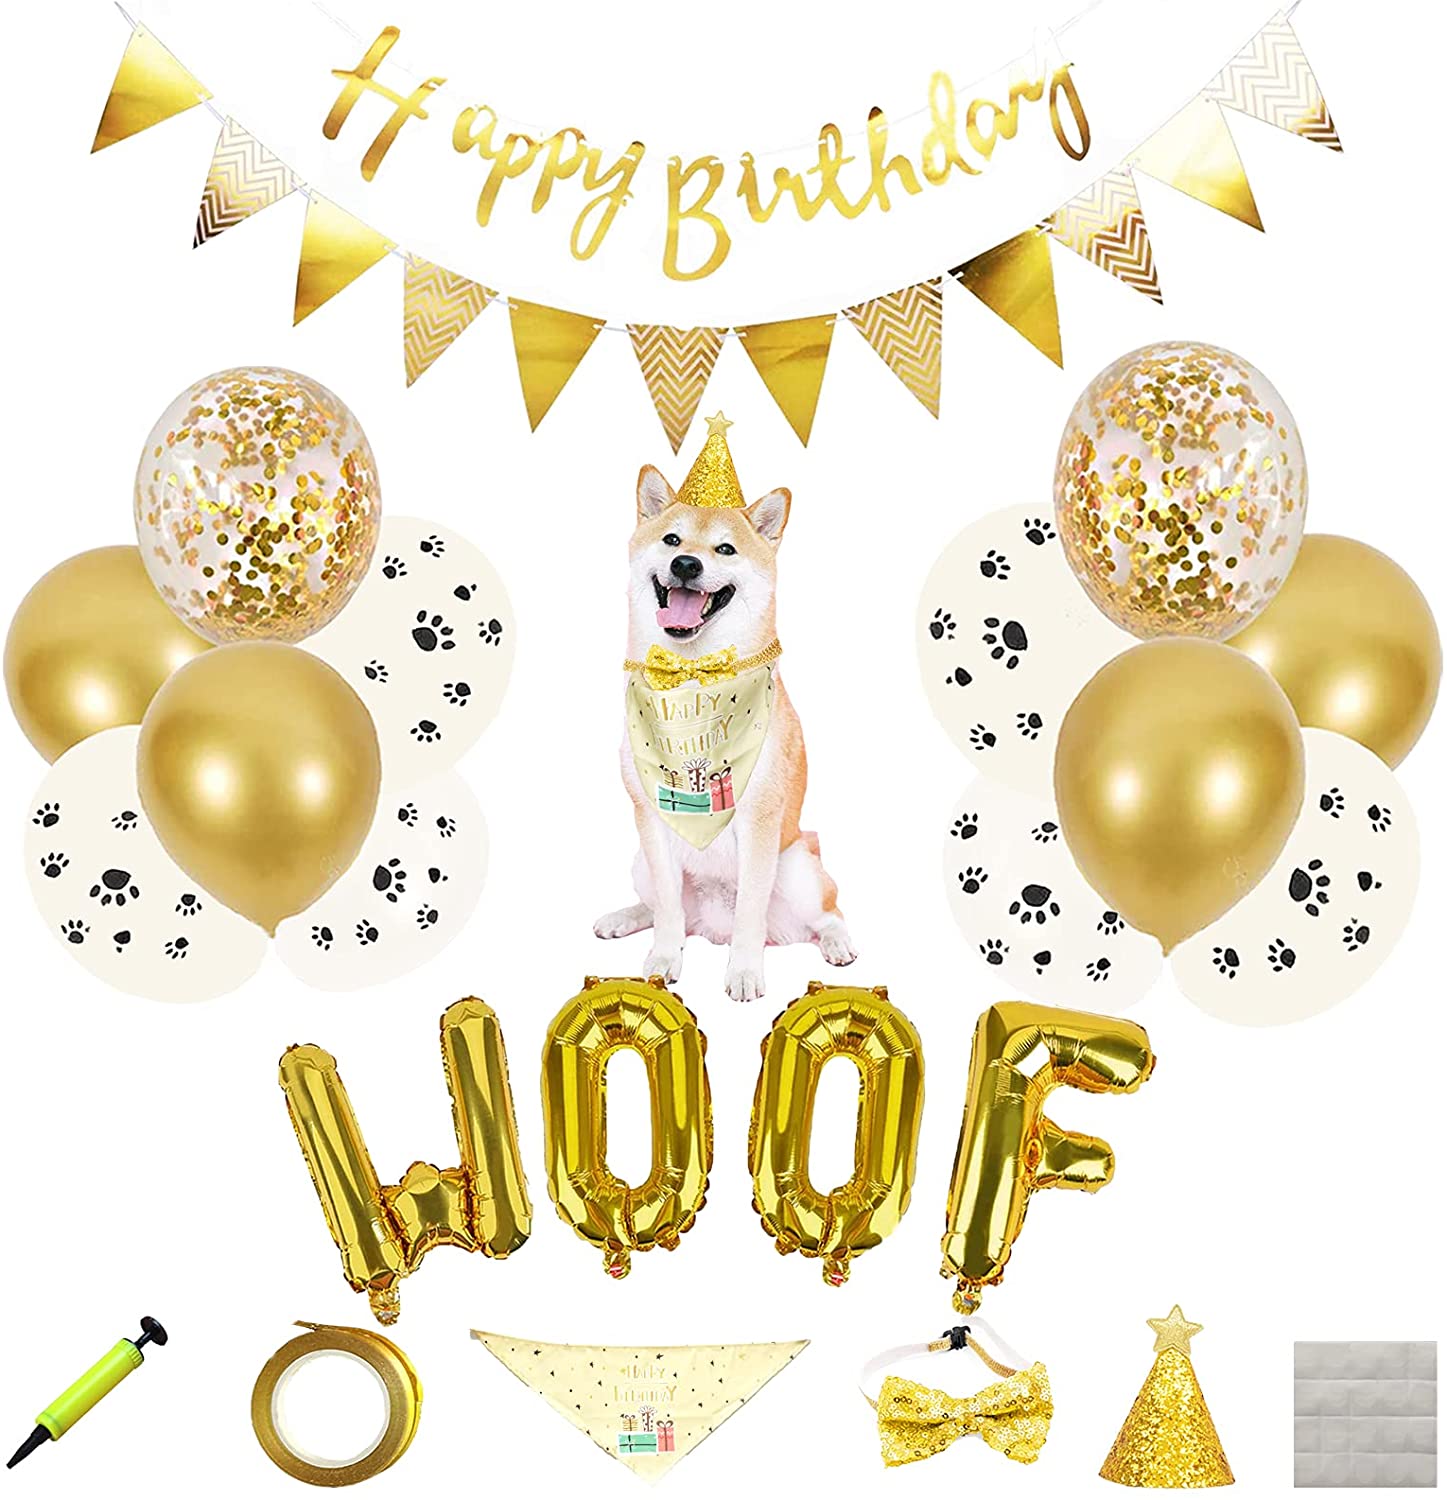 Dog Birthday Party Supplies Large Dog Bandana Party Decorations Set with Balloons,Birthday Hat,Bow Tie,Happy Birthday Banner,Birthday Number Candle for Dog 1st Birthday Girl Party 